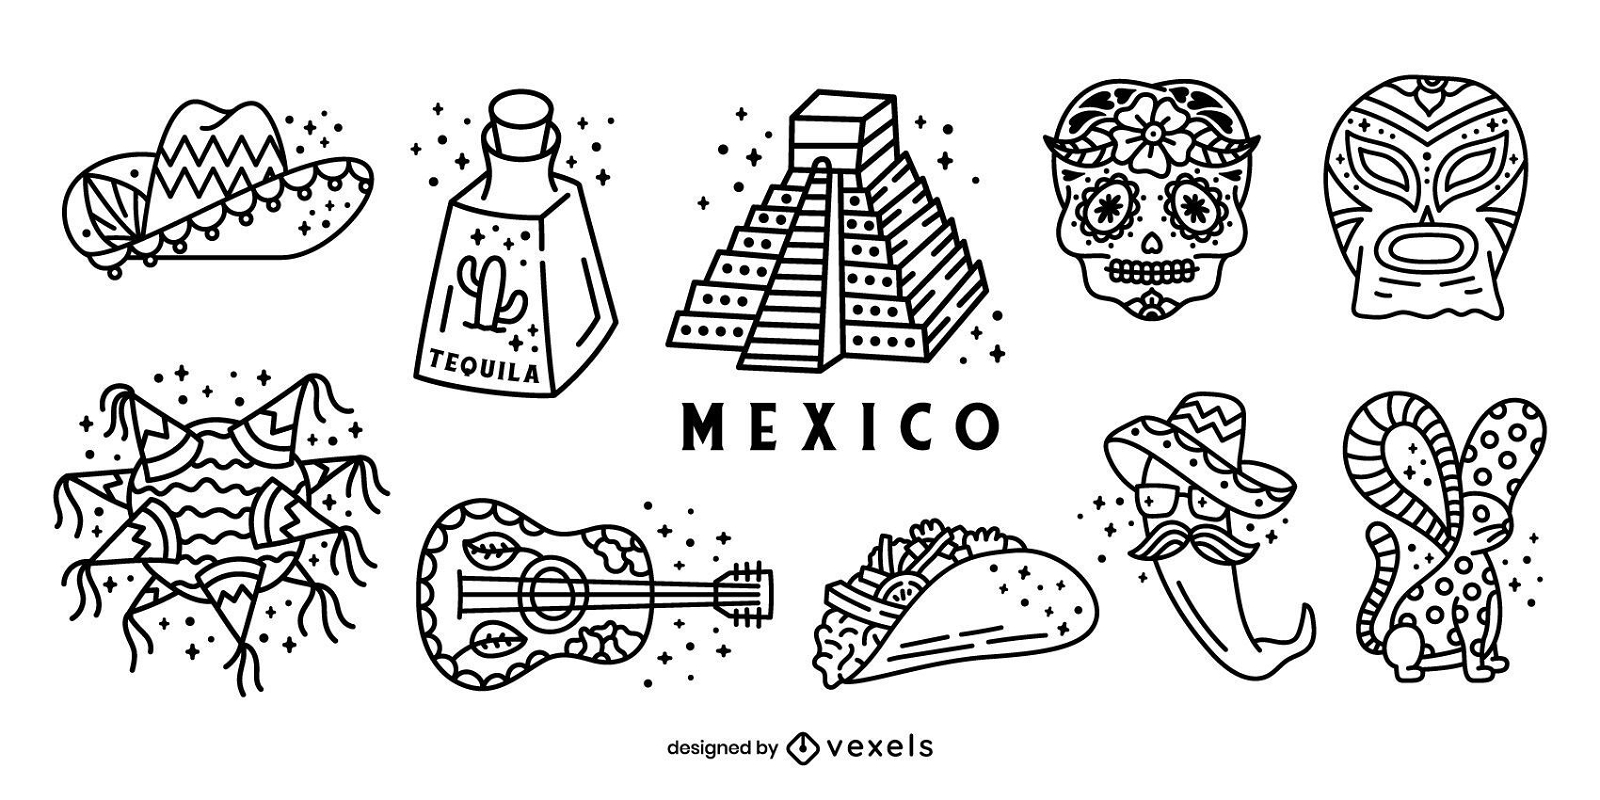 Mexico Stroke Elements Pack